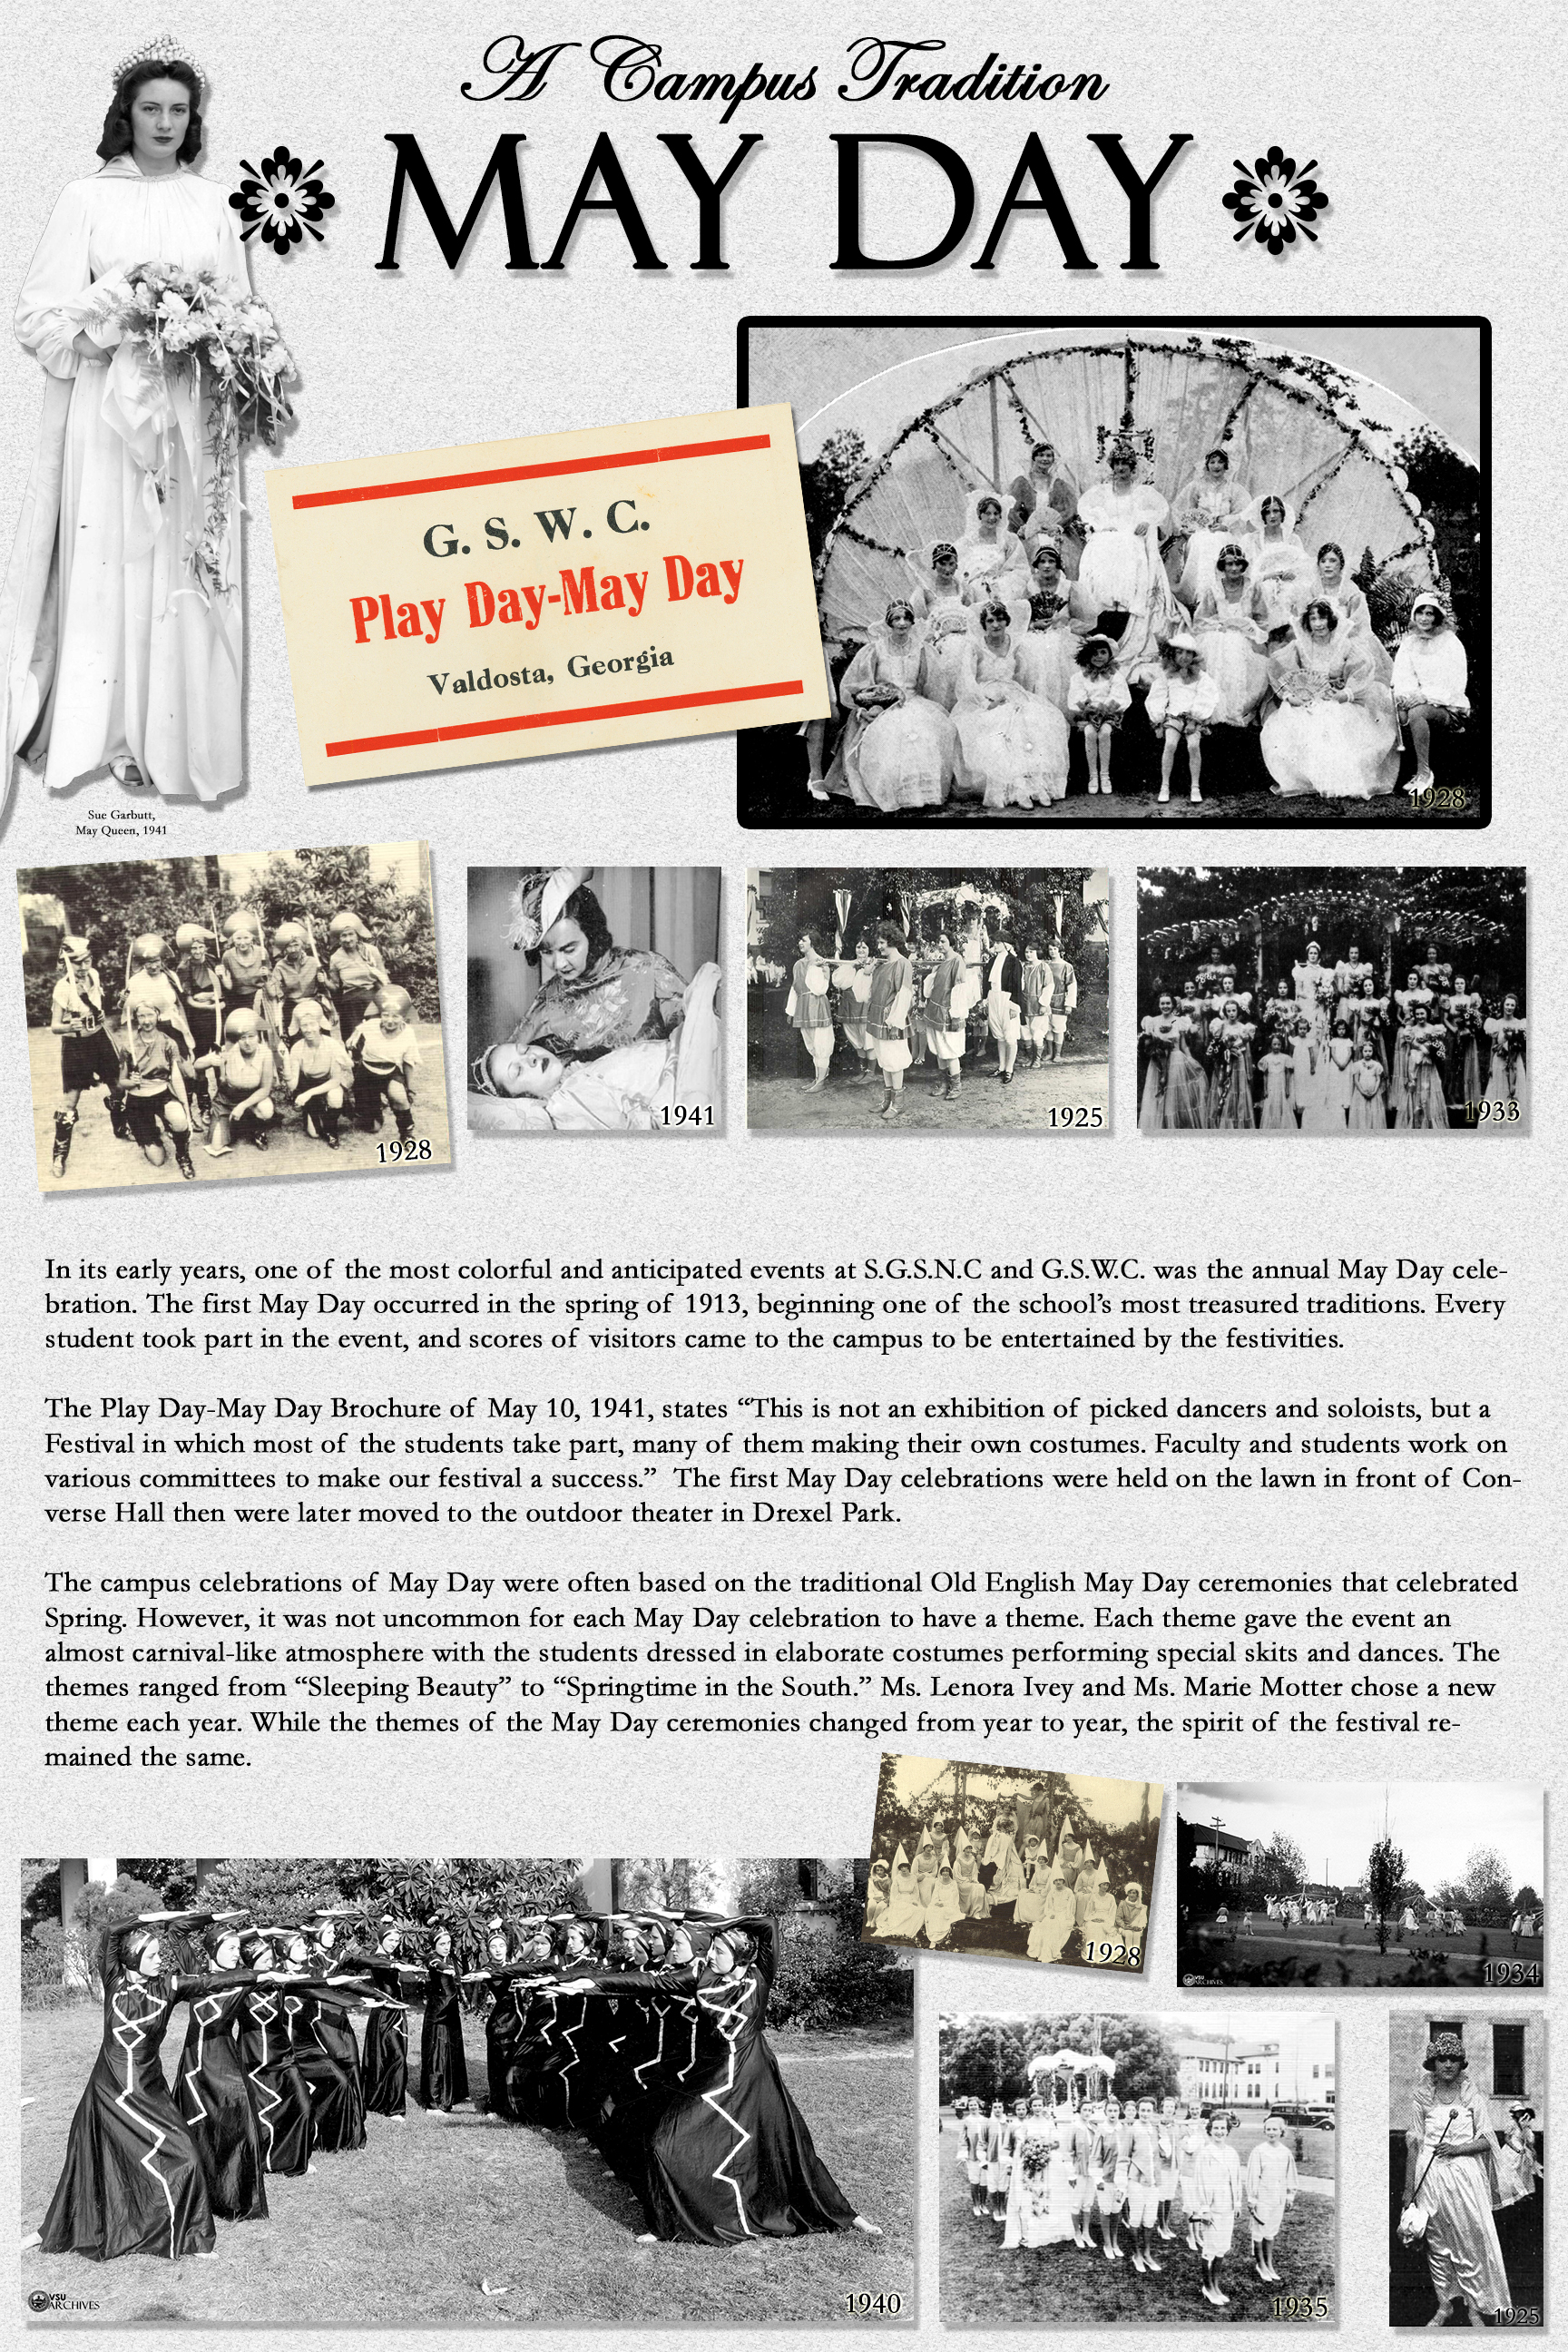 In its early years, one of the most colorful and anticipated events at S.G.S.N.C and G.S.W.C. was the annual May Day celebration. The first May Day occurred in the spring of 1913, beginning one of the school’s most treasured traditions. Every student took part in the event, and scores of visitors came to the campus to be entertained by the festivities.
                    The Play Day-May Day Brochure of May 10, 1941, states “This is not an exhibition of picked dancers and soloists, but a Festival in which most of the students take part, many of them making their own costumes. Faculty and students work on various committees to make our festival a success.” The first May Day celebrations were held on the lawn in front of Converse Hall then were later moved to the outdoor theater in Drexel Park.
                    
                    The campus celebrations of May Day were often based on the traditional Old English May Day ceremonies that celebrated Spring. However, it was not uncommon for each May Day celebration to have a theme. Each theme gave the event an ##And this is also why you don't call the fucking cops on people

If you call the cops on somebody, understand who you are calling. If you send a gang of armed men after somebody you are culpible for their actions. This should be people's last resort, but motherfuckers call the cops over everything and anything. almost carnival-like atmosphere with the students dressed in elaborate costumes performing special skits and dances. The themes ranged from “Sleeping Beauty” to “Springtime in the South.” Ms. Lenora Ivey and Ms. Marie Motter chose a new theme each year. While the themes of the May Day ceremonies changed from year to year, the spirit of the festival remained the same.